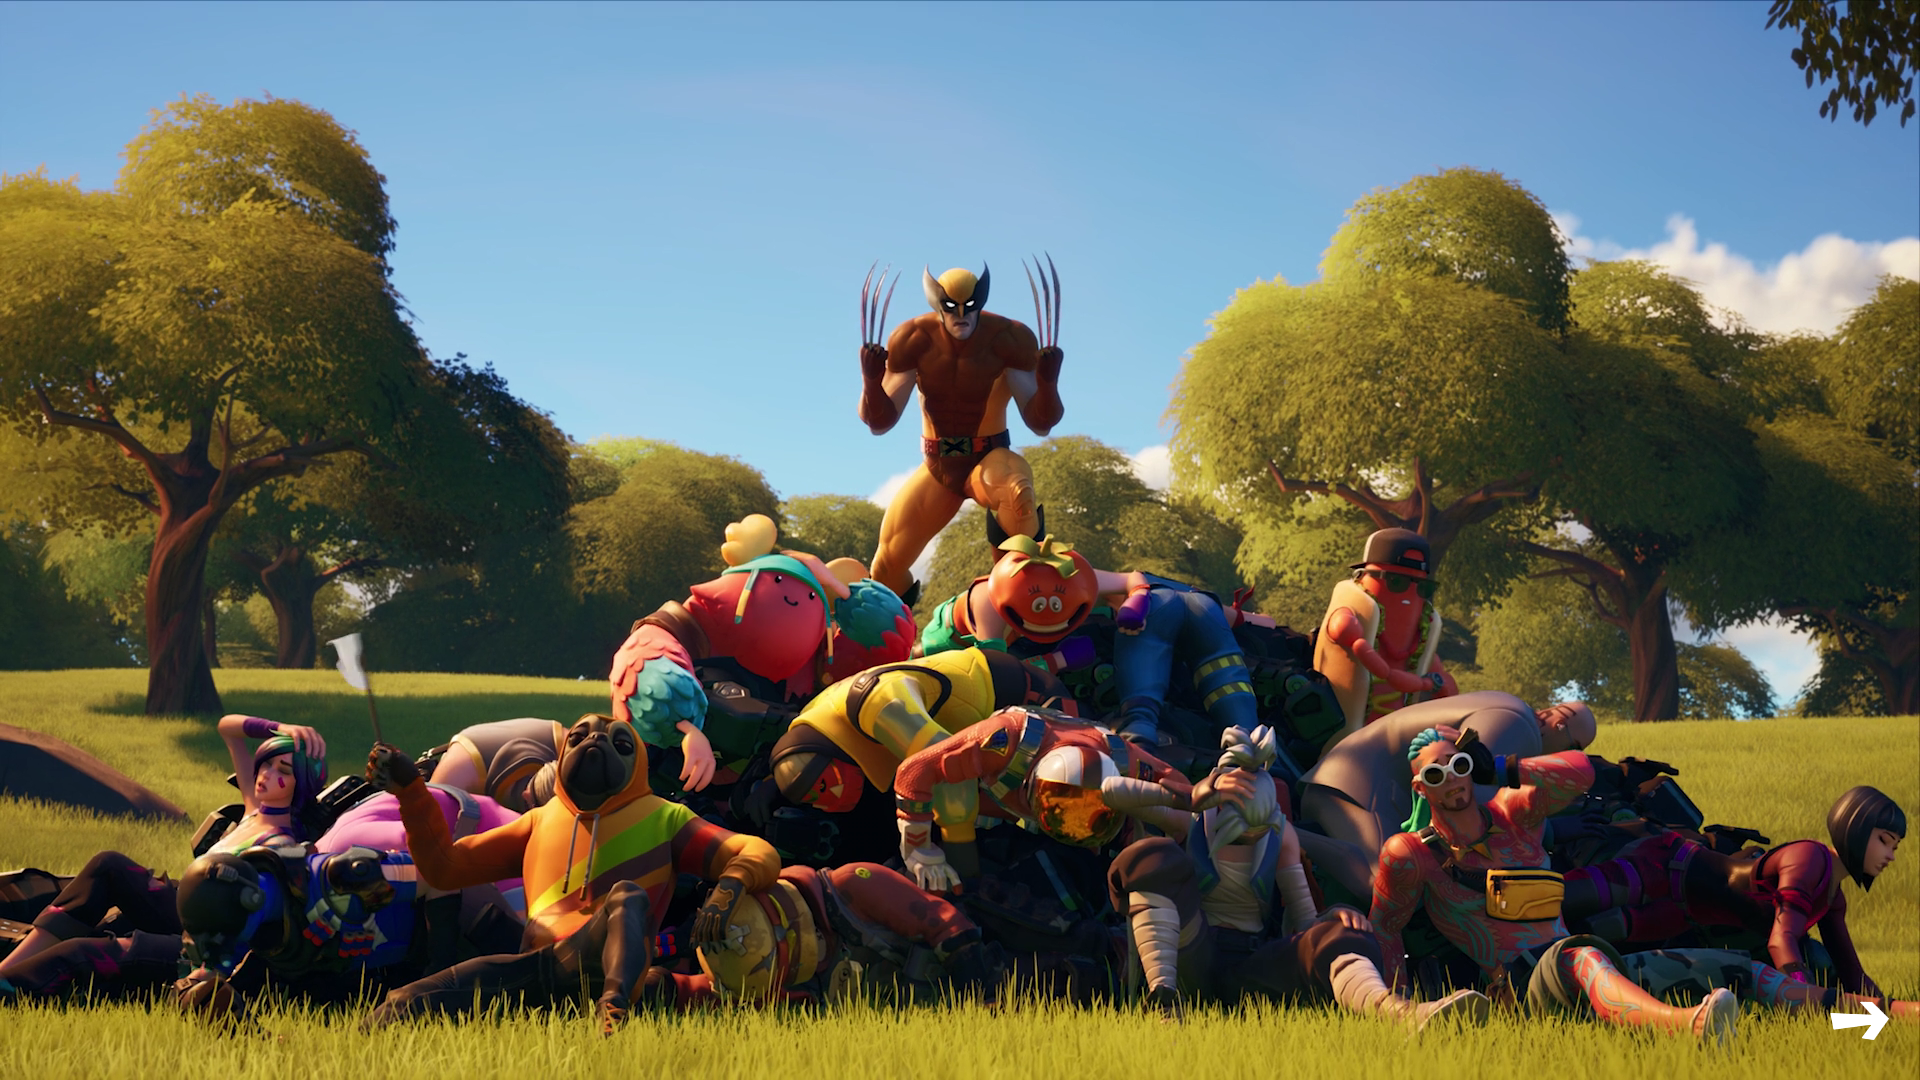 Wolverine standing on top of a pile of dead Fortnite players